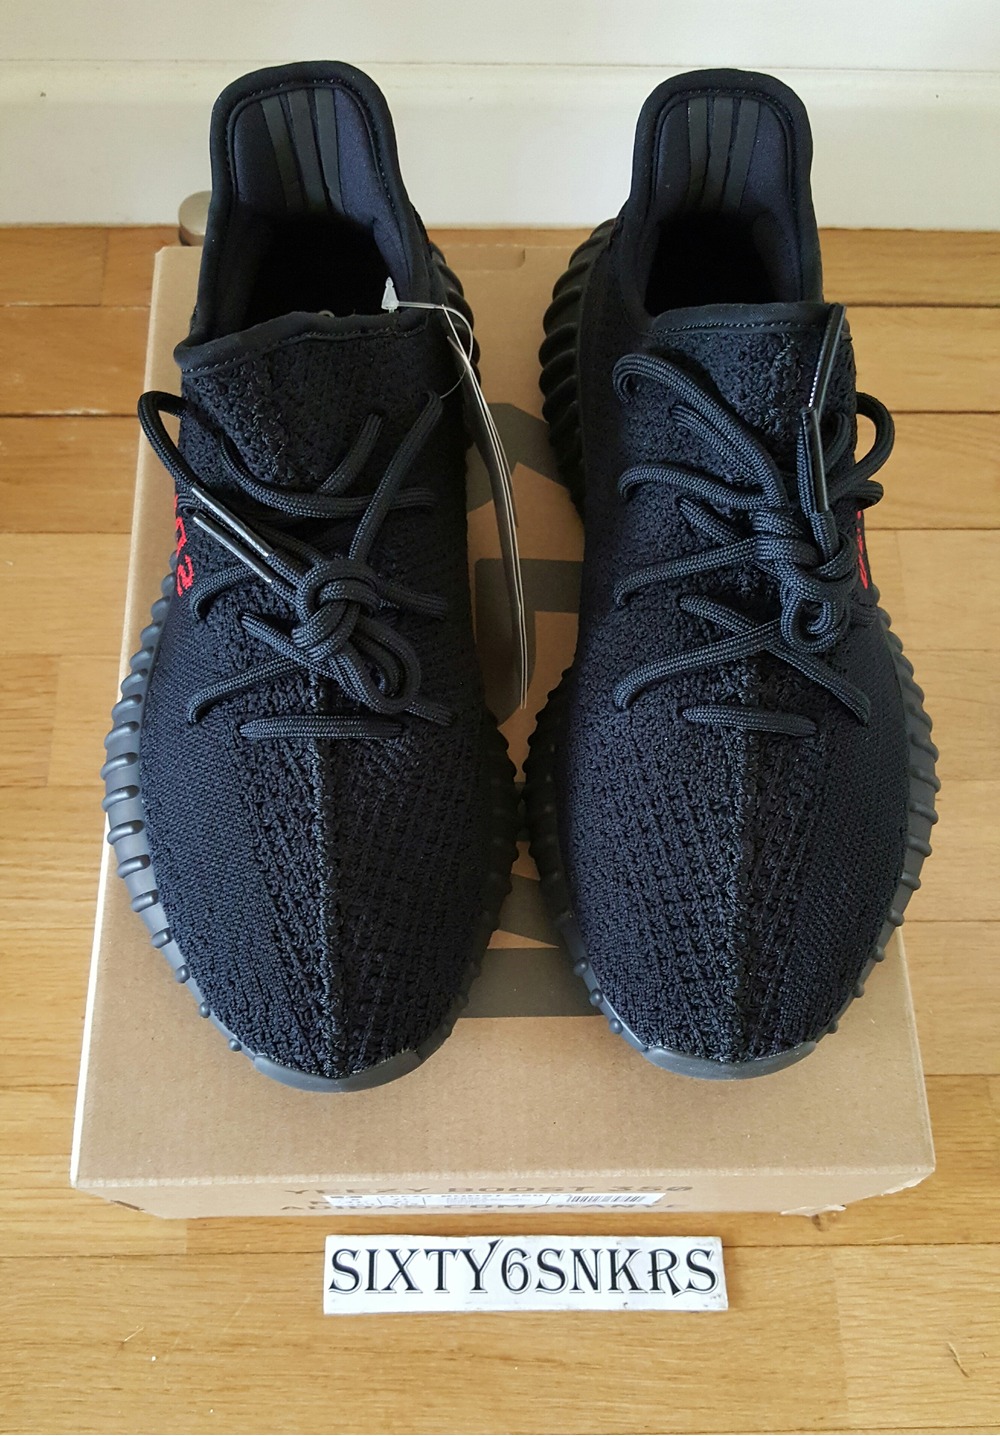 ADIDAS YEEZY 350 v2 BRED UNBOXING REVIEW (FLYSNEAKER